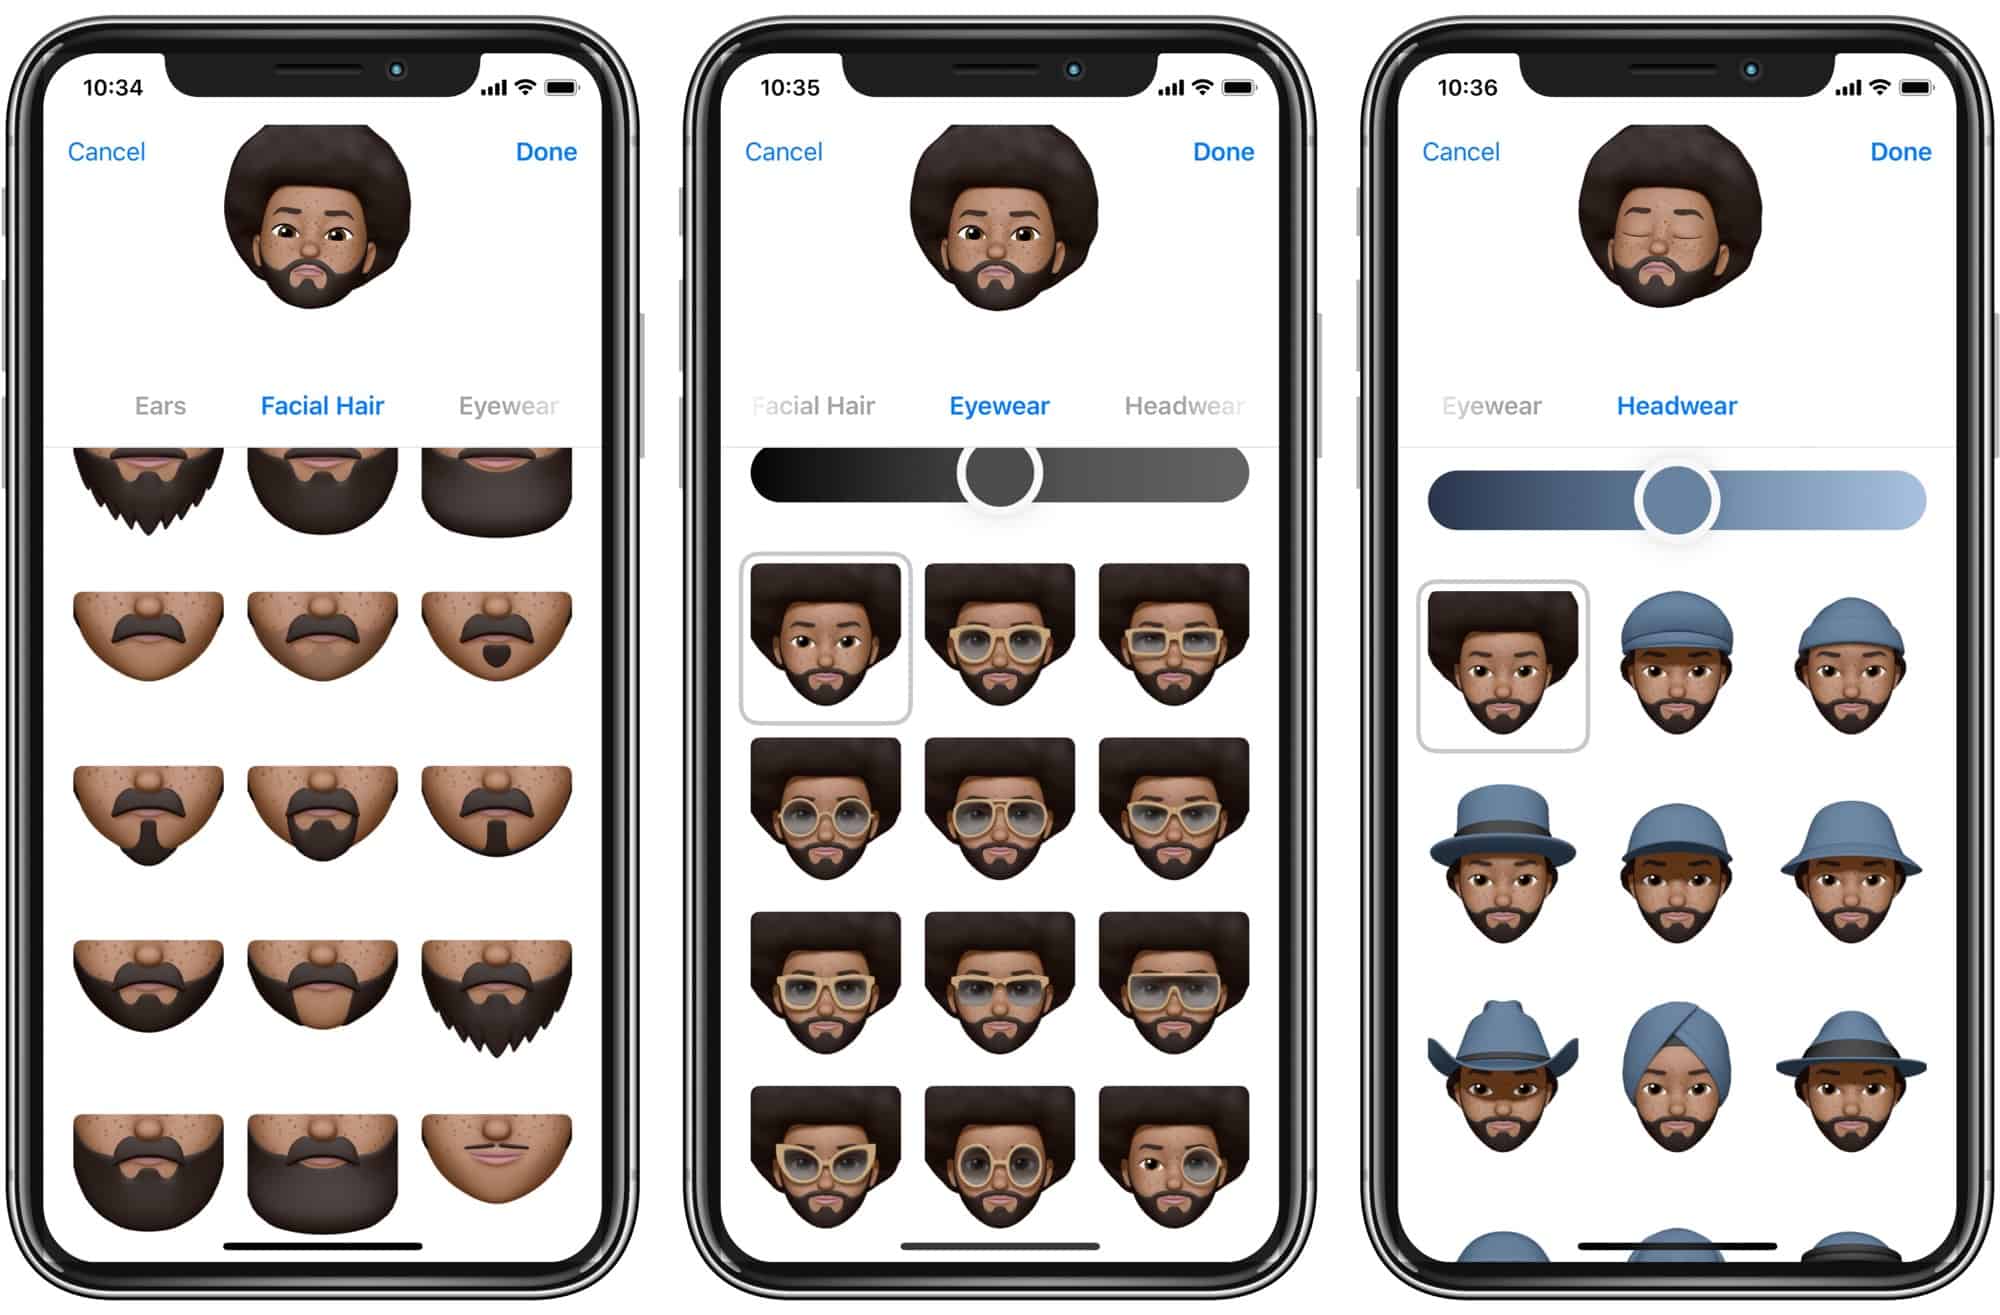 Memoji lets you add hair, beards, headwear and glasses. There are even earrings in there.